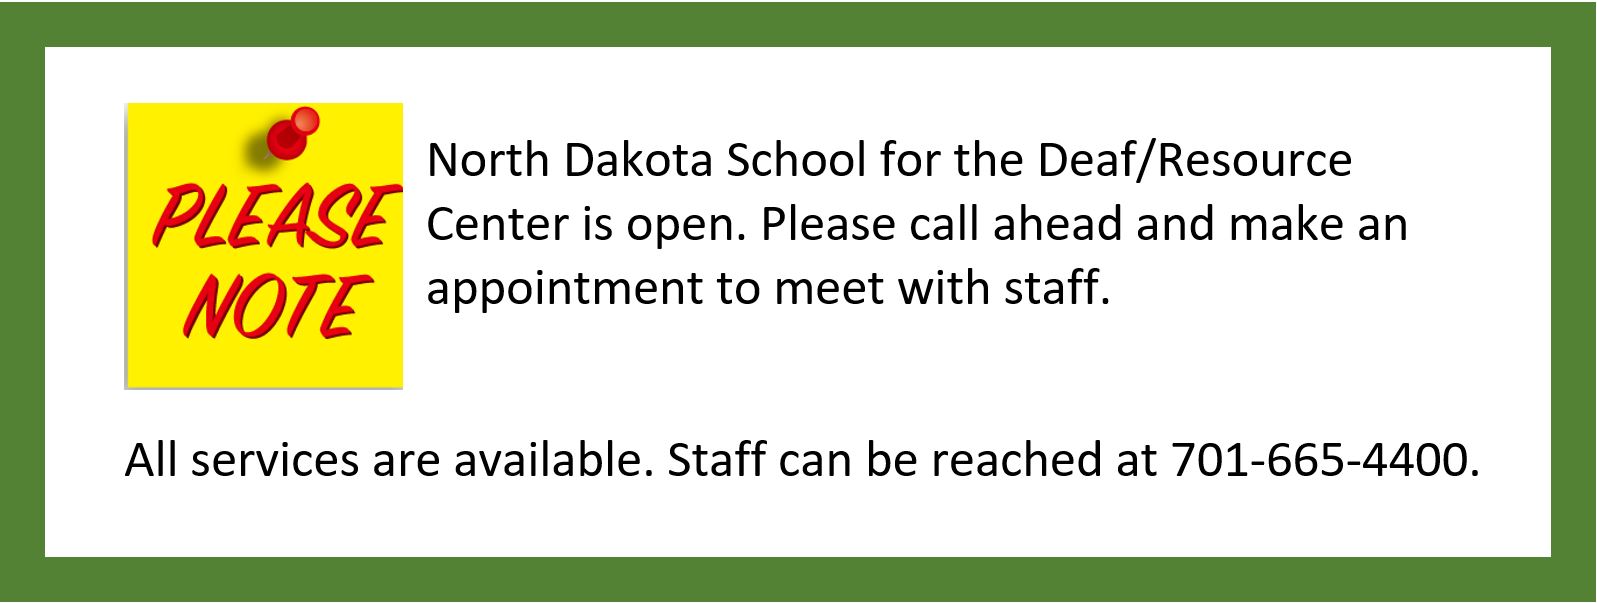 Announcement that NDSD is open for services